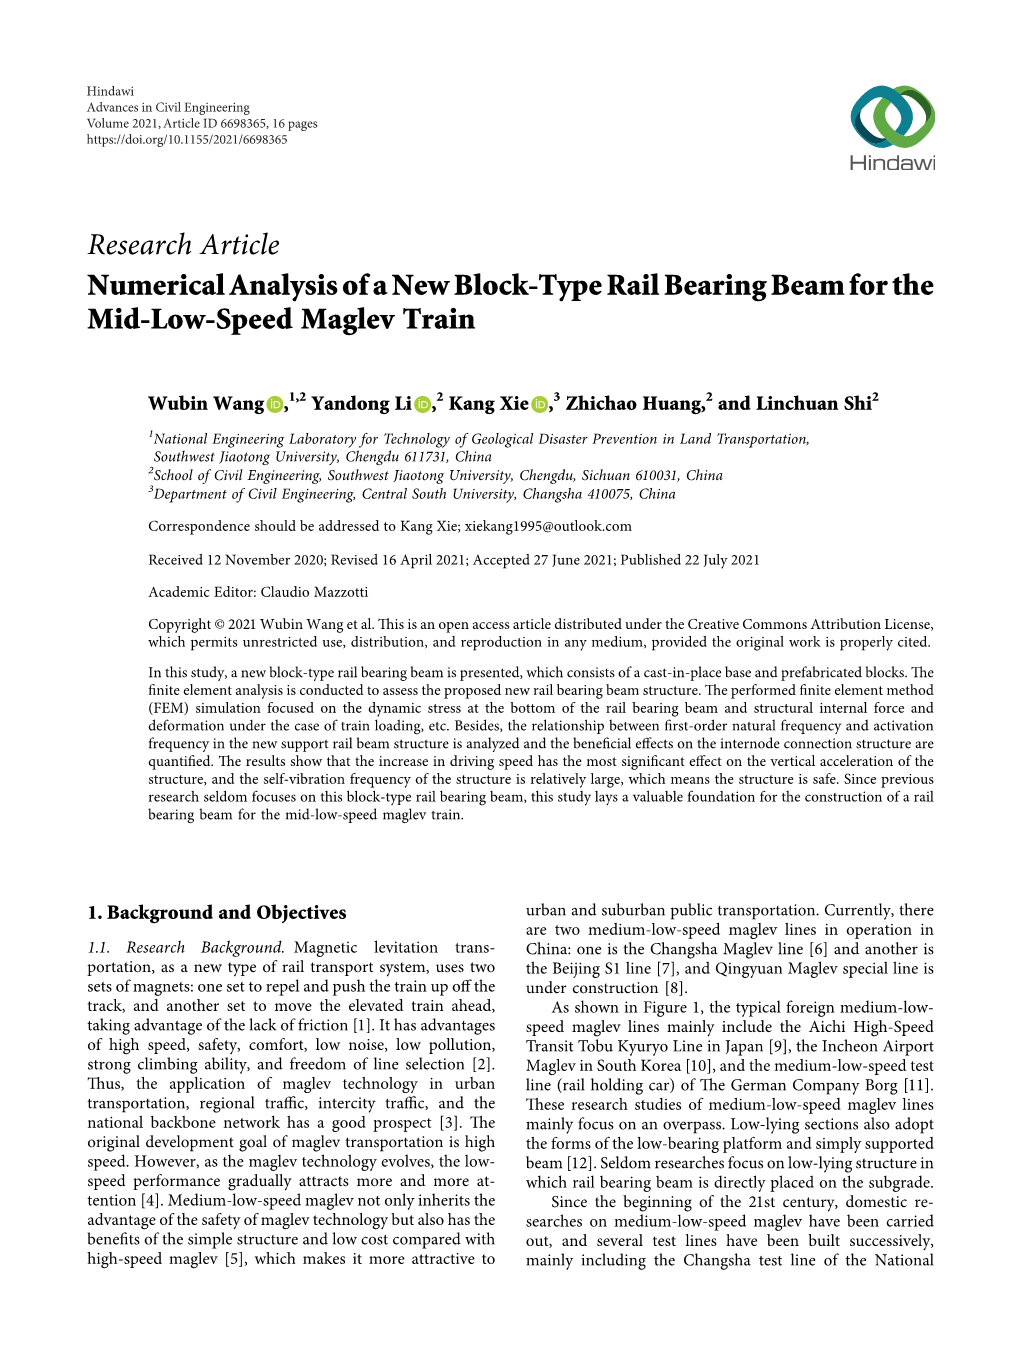 Numerical Analysis of a New Block-Type Rail Bearing Beam for the Mid-Low-Speed Maglev Train